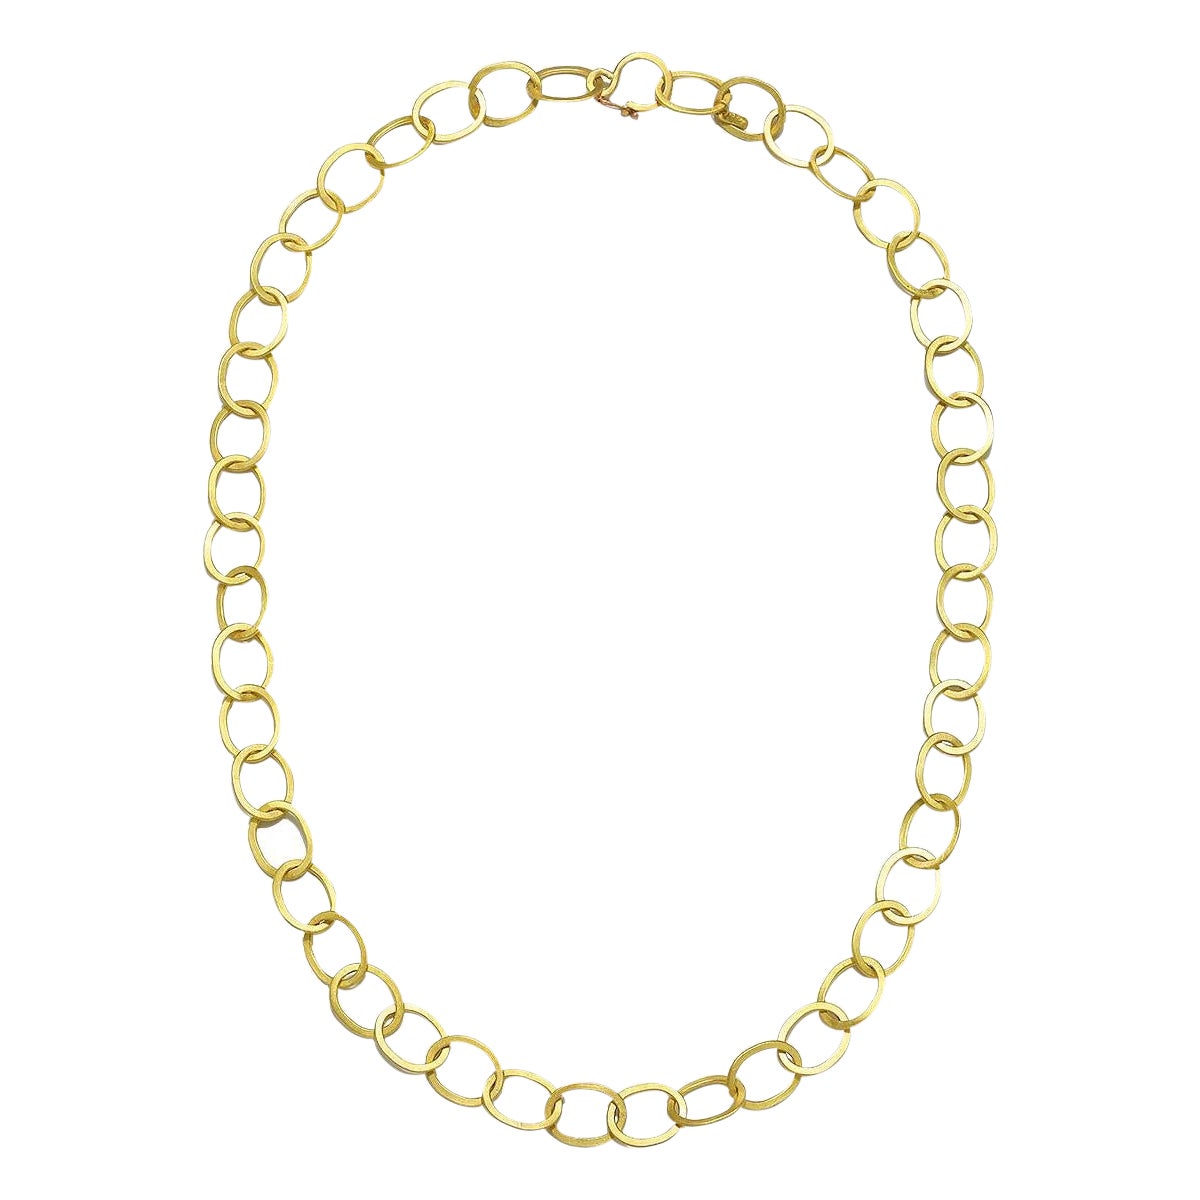 Faye Kim 18 Karat Gold Oval Planished XL Link Chain For Sale